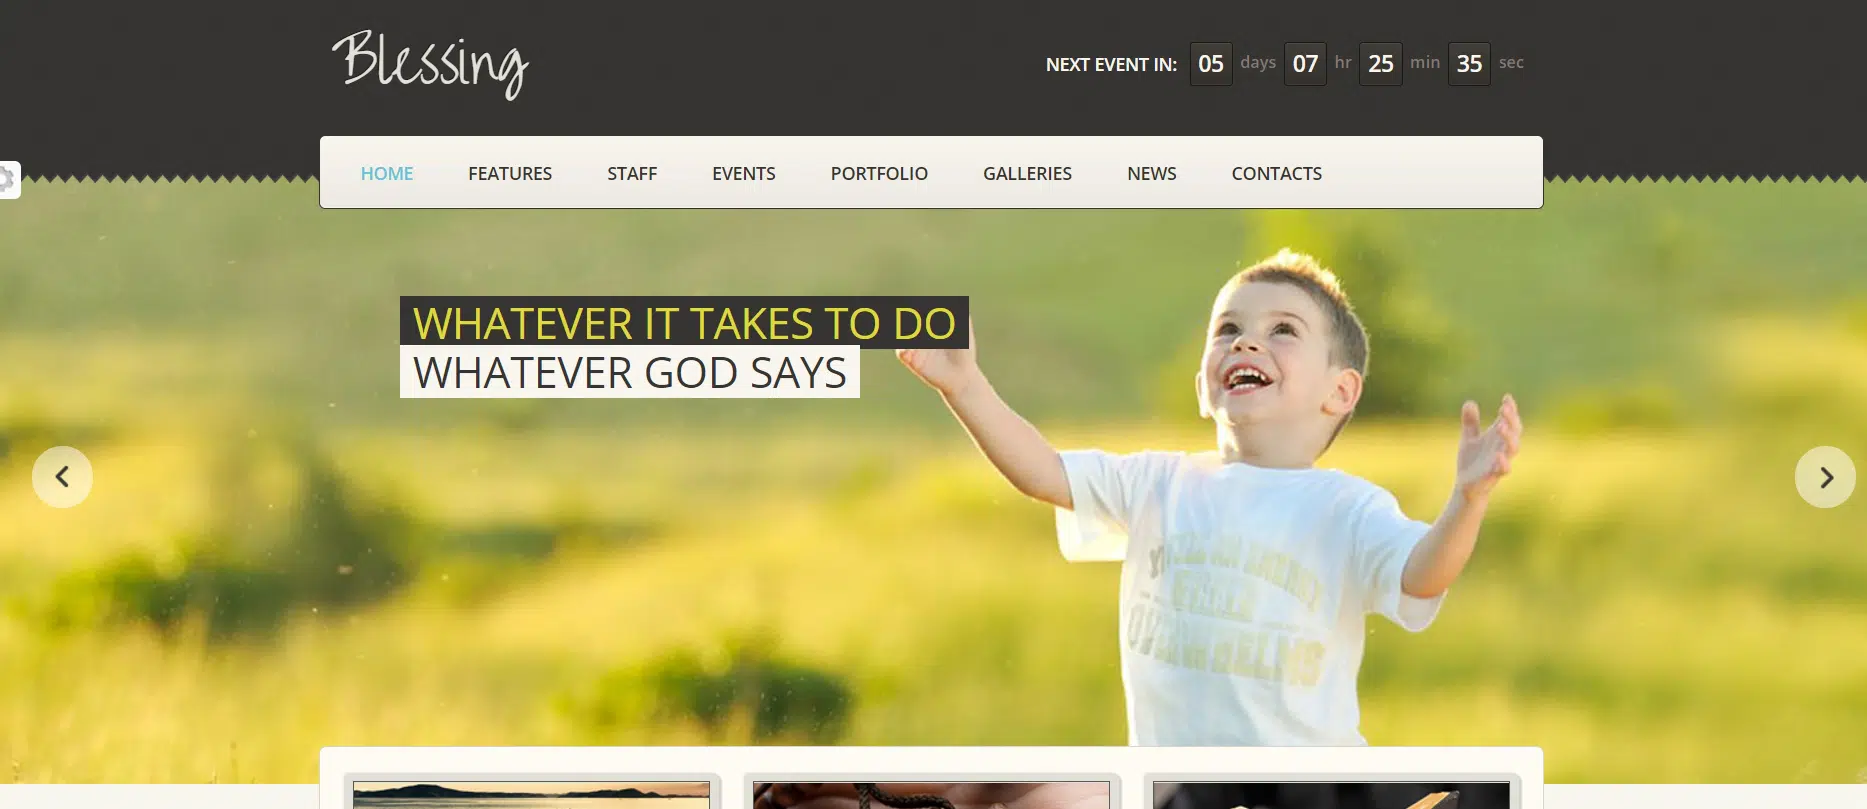 Blessing - Church and Charity website template